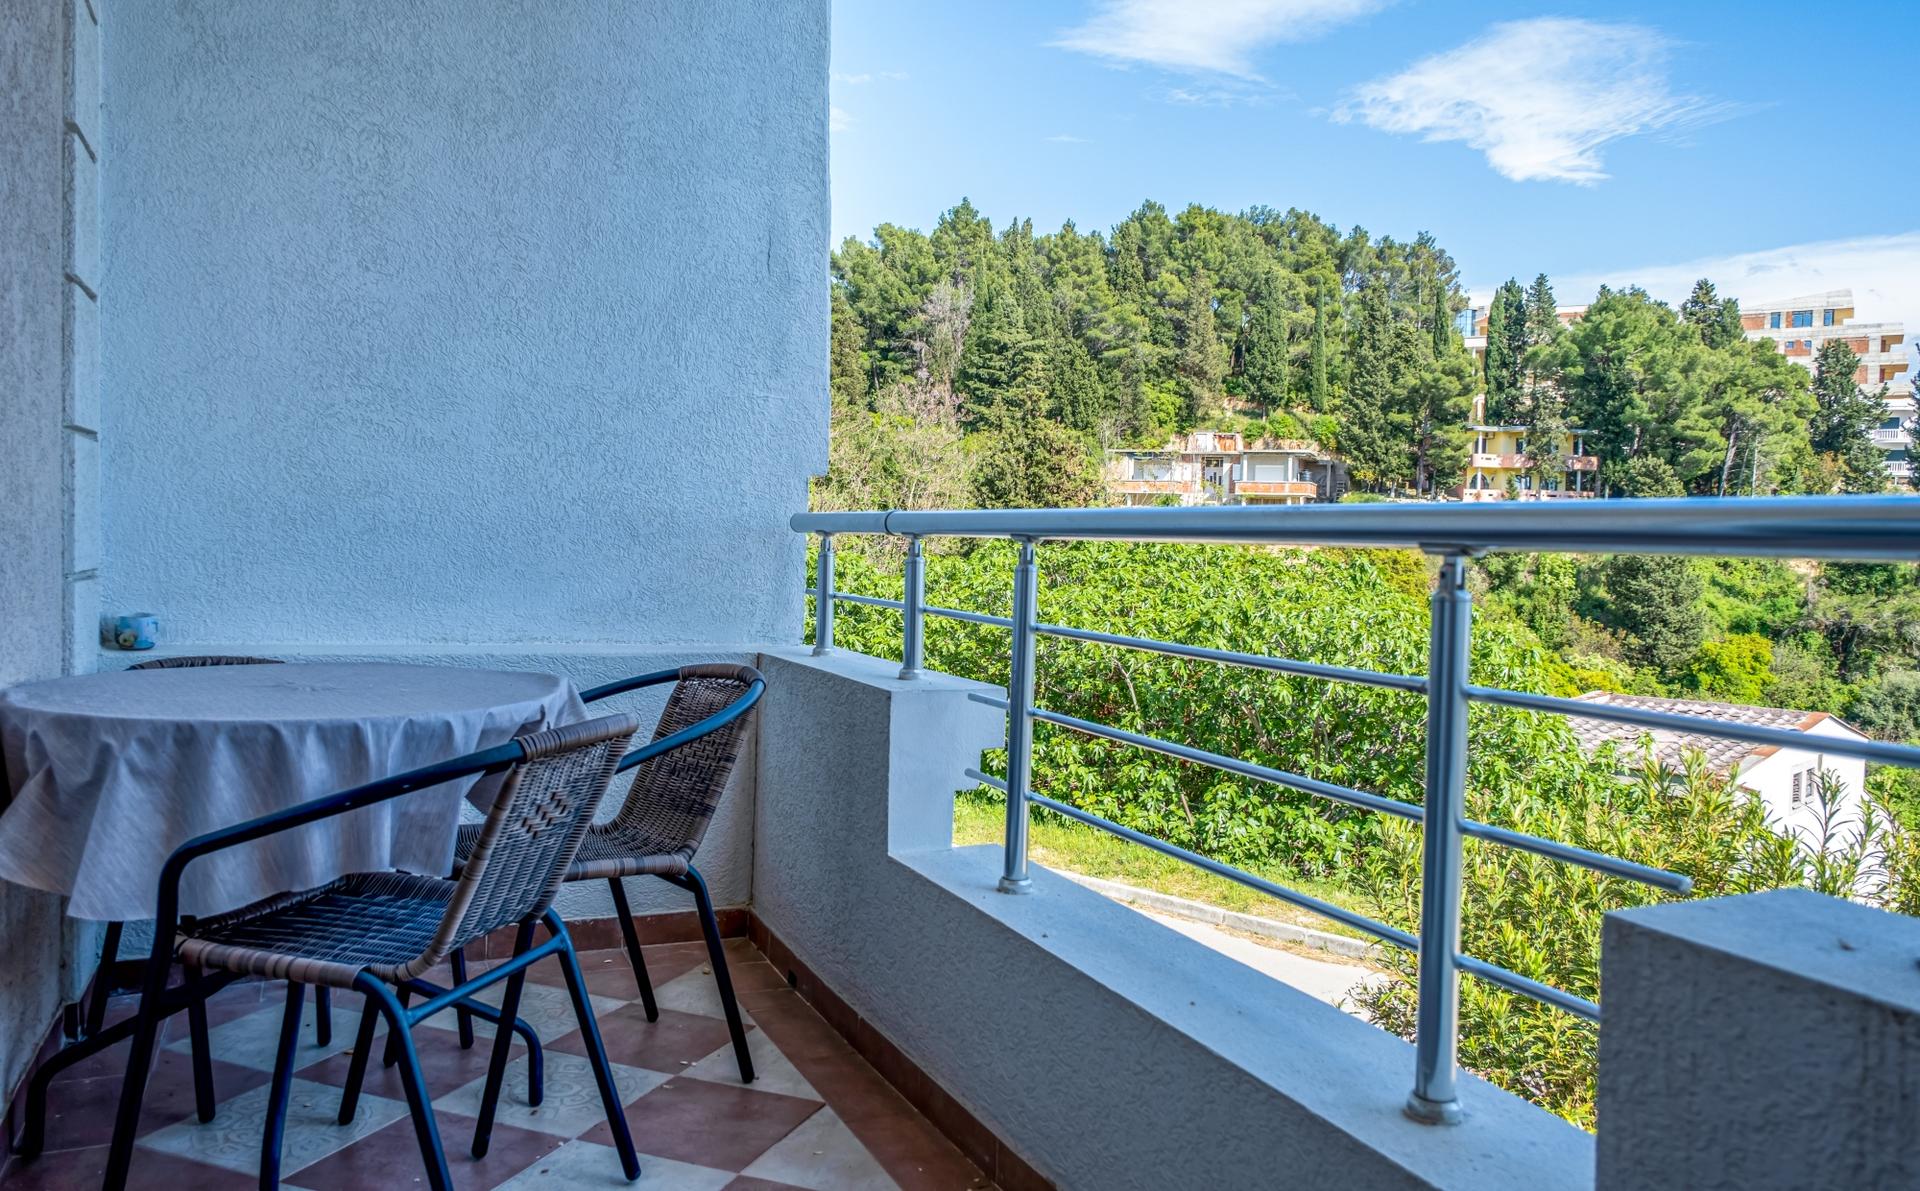 Our nature-view terrace flat has a double bed and a single bed…